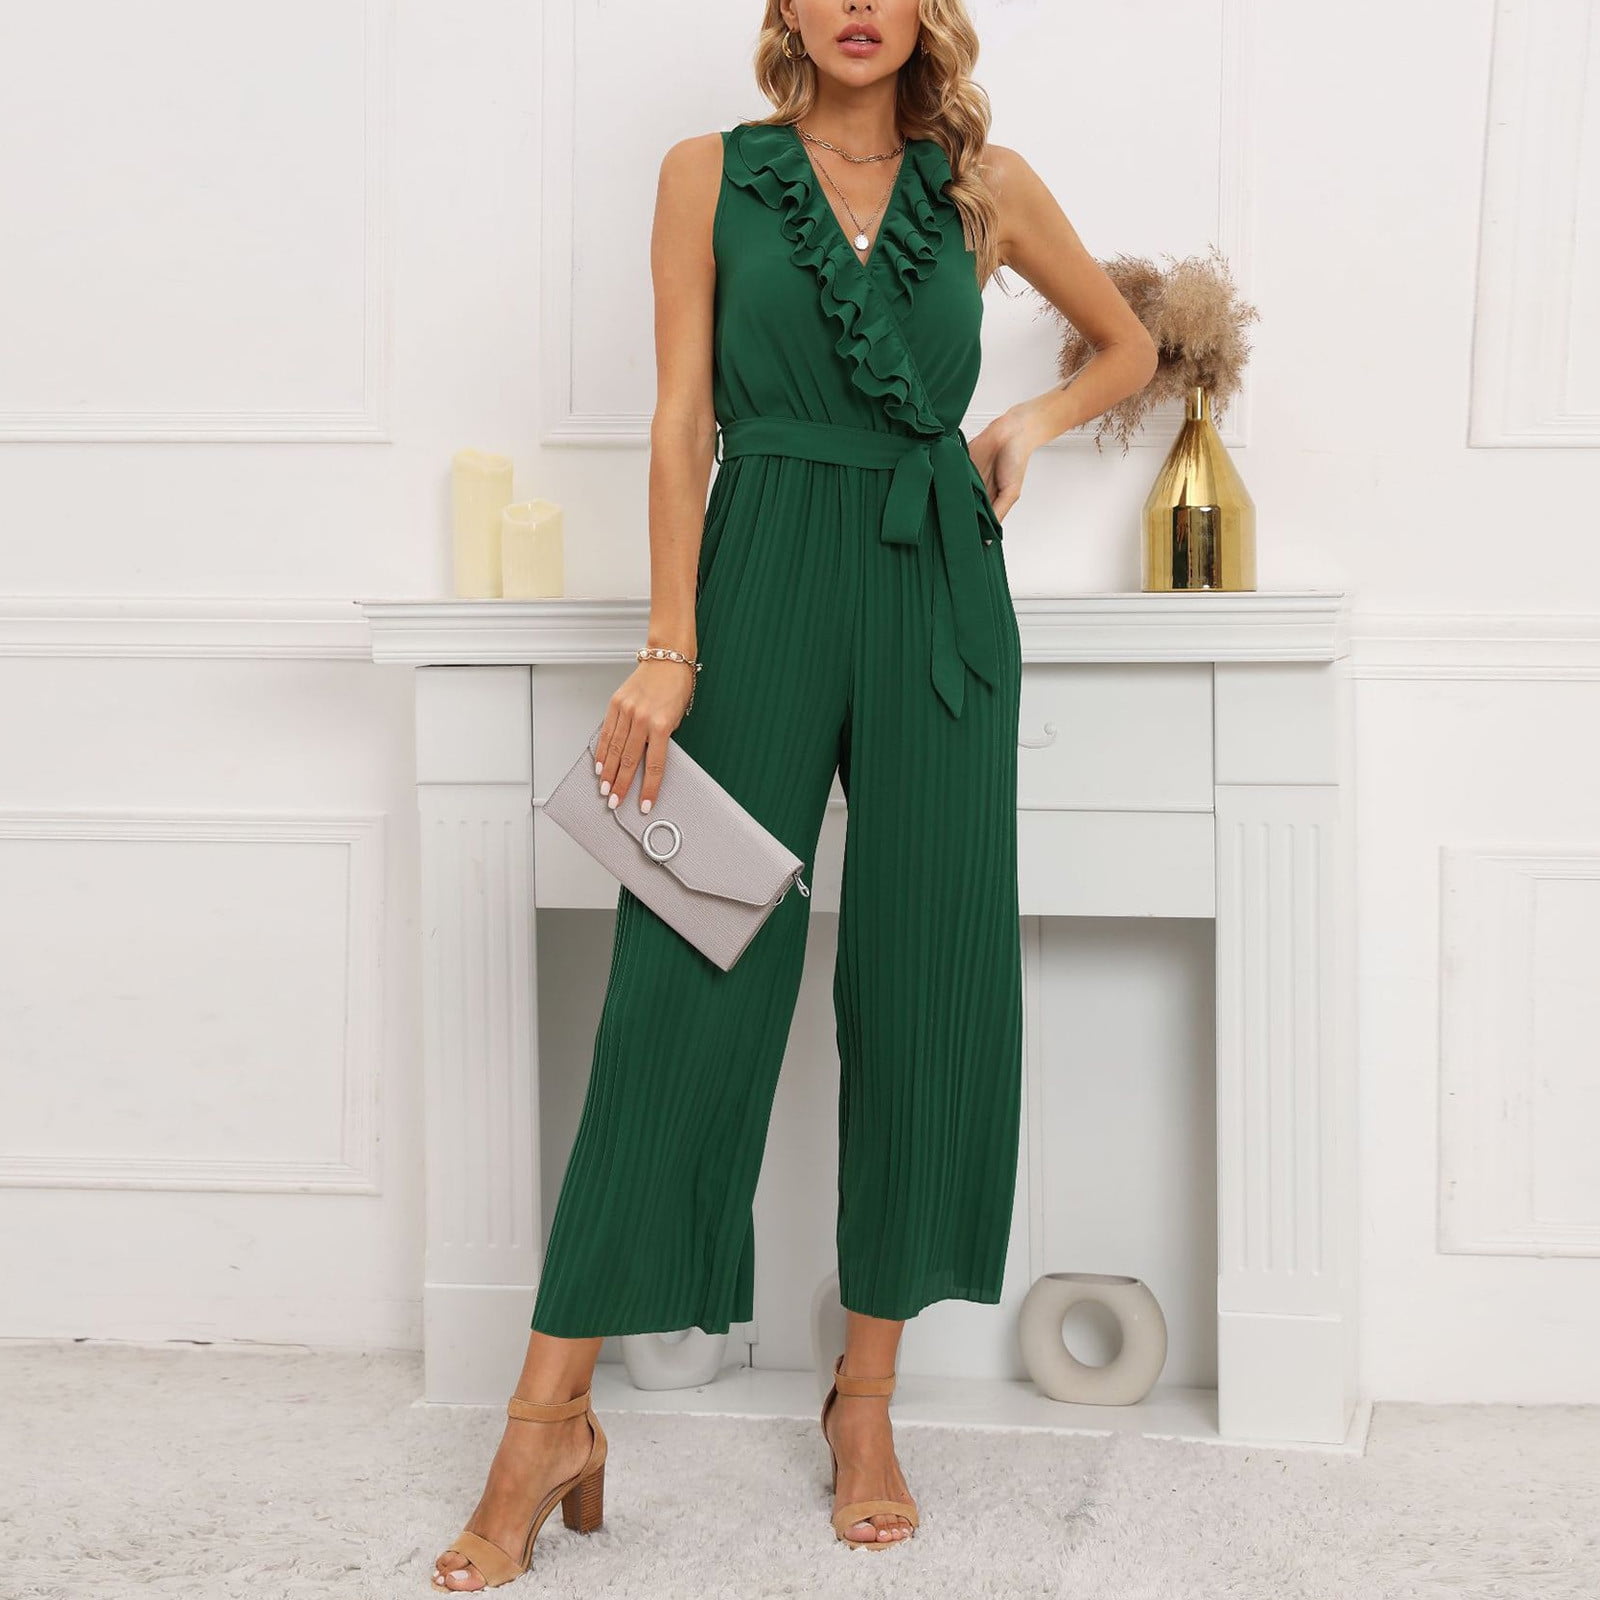 Jumpsuits for Women Dressy Summer Wide Leg Pants High Waist Wide Leg Romper  with Pockets One Piece Casual Outfits Jumpsuits for Women Dressy Wedding Red  XL 